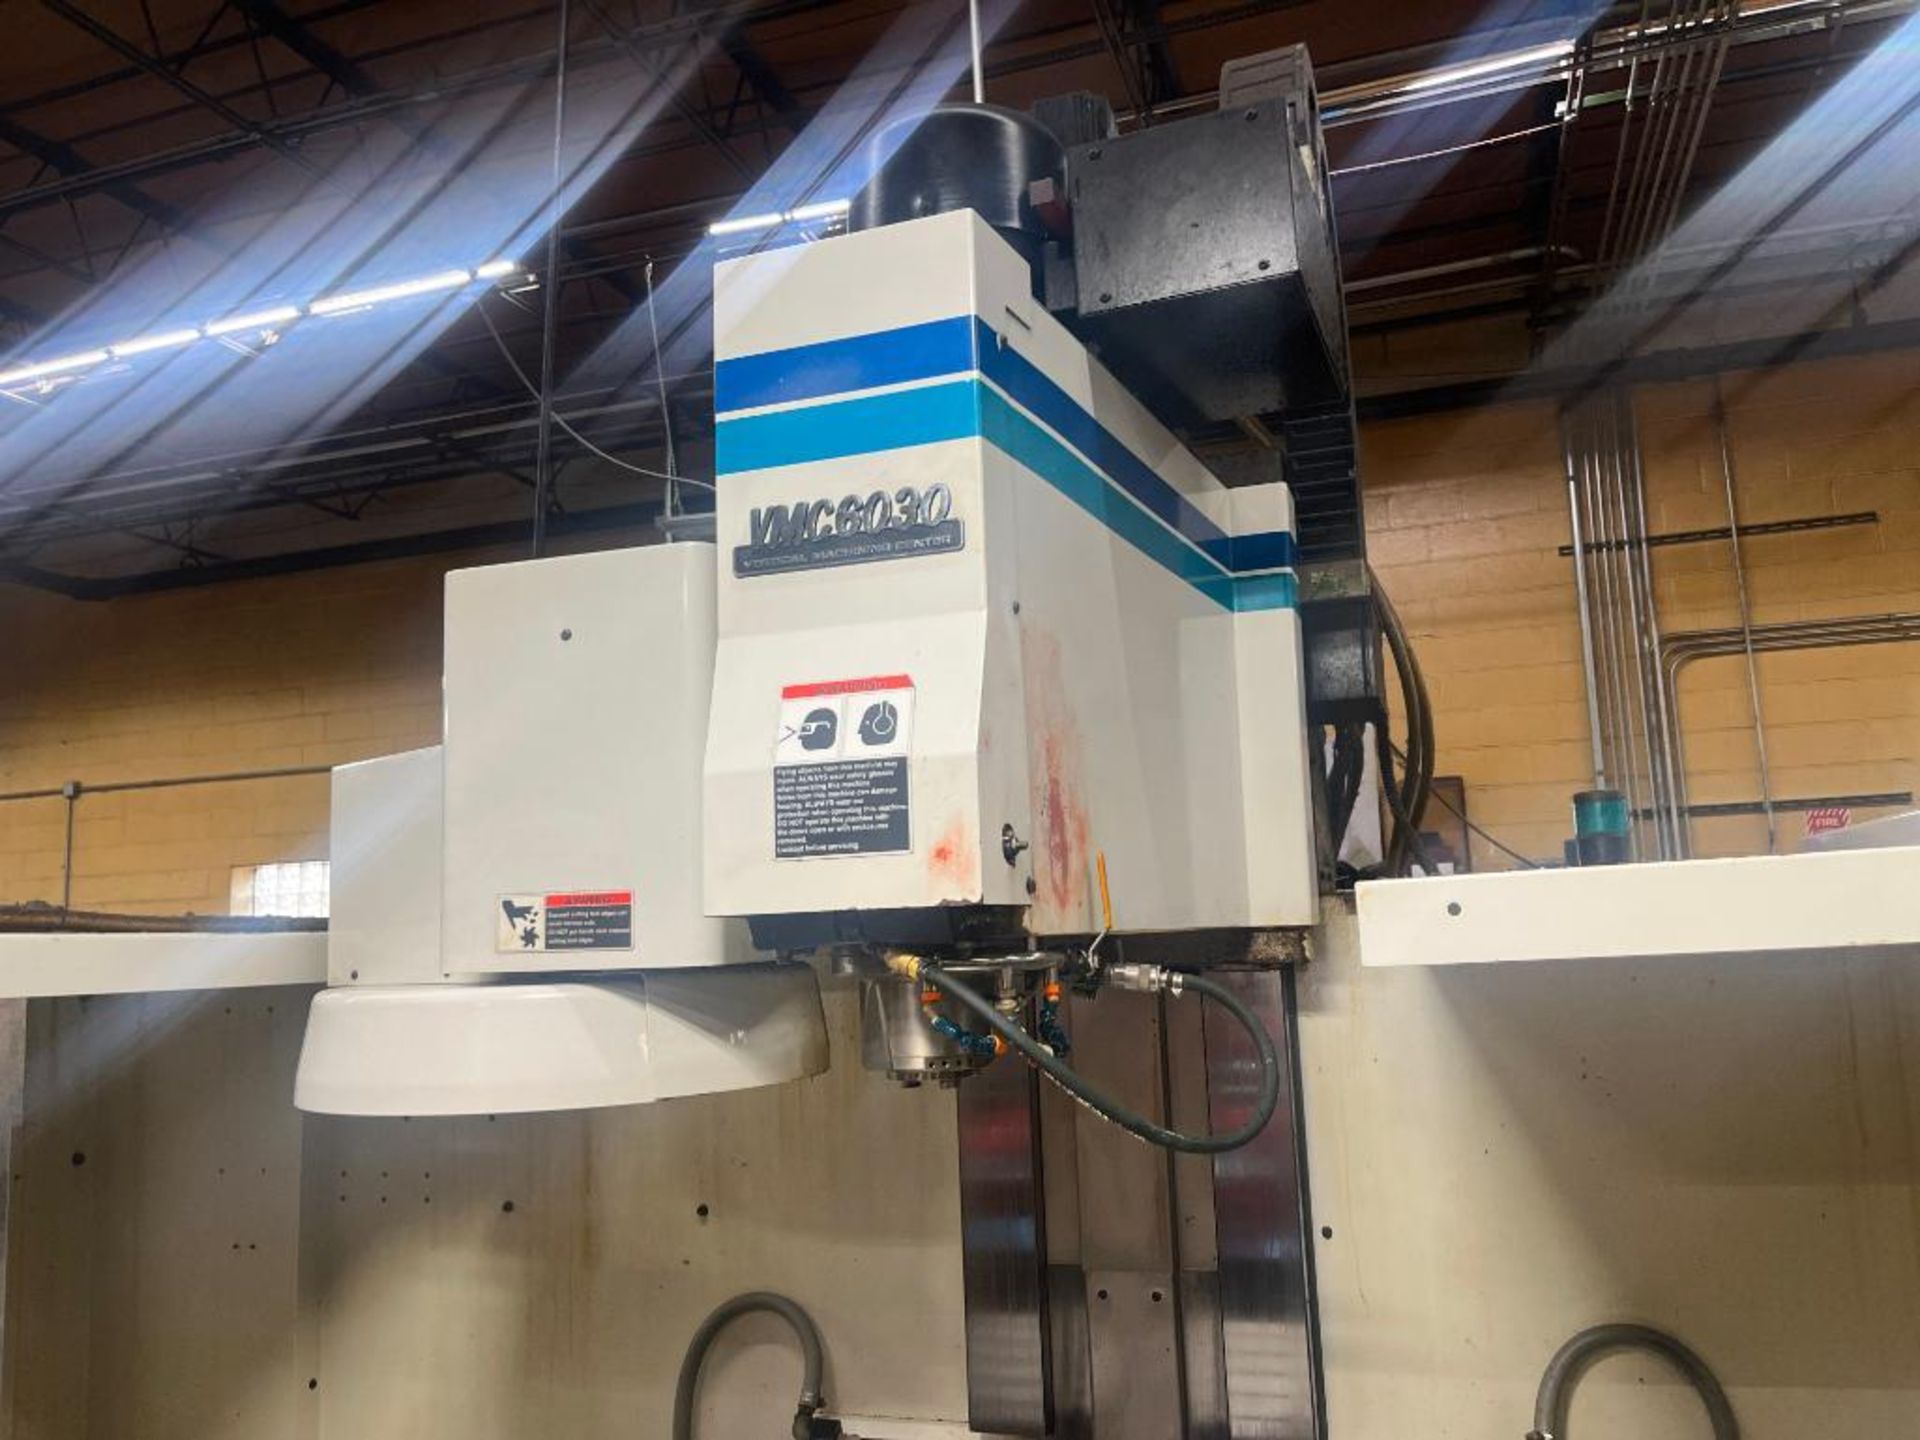 Fadal CNC Vertical Machining Center Model Model 907-1 VMC 6030HT, S/N 9704645 (1997) with Fadal CNC8 - Image 8 of 33